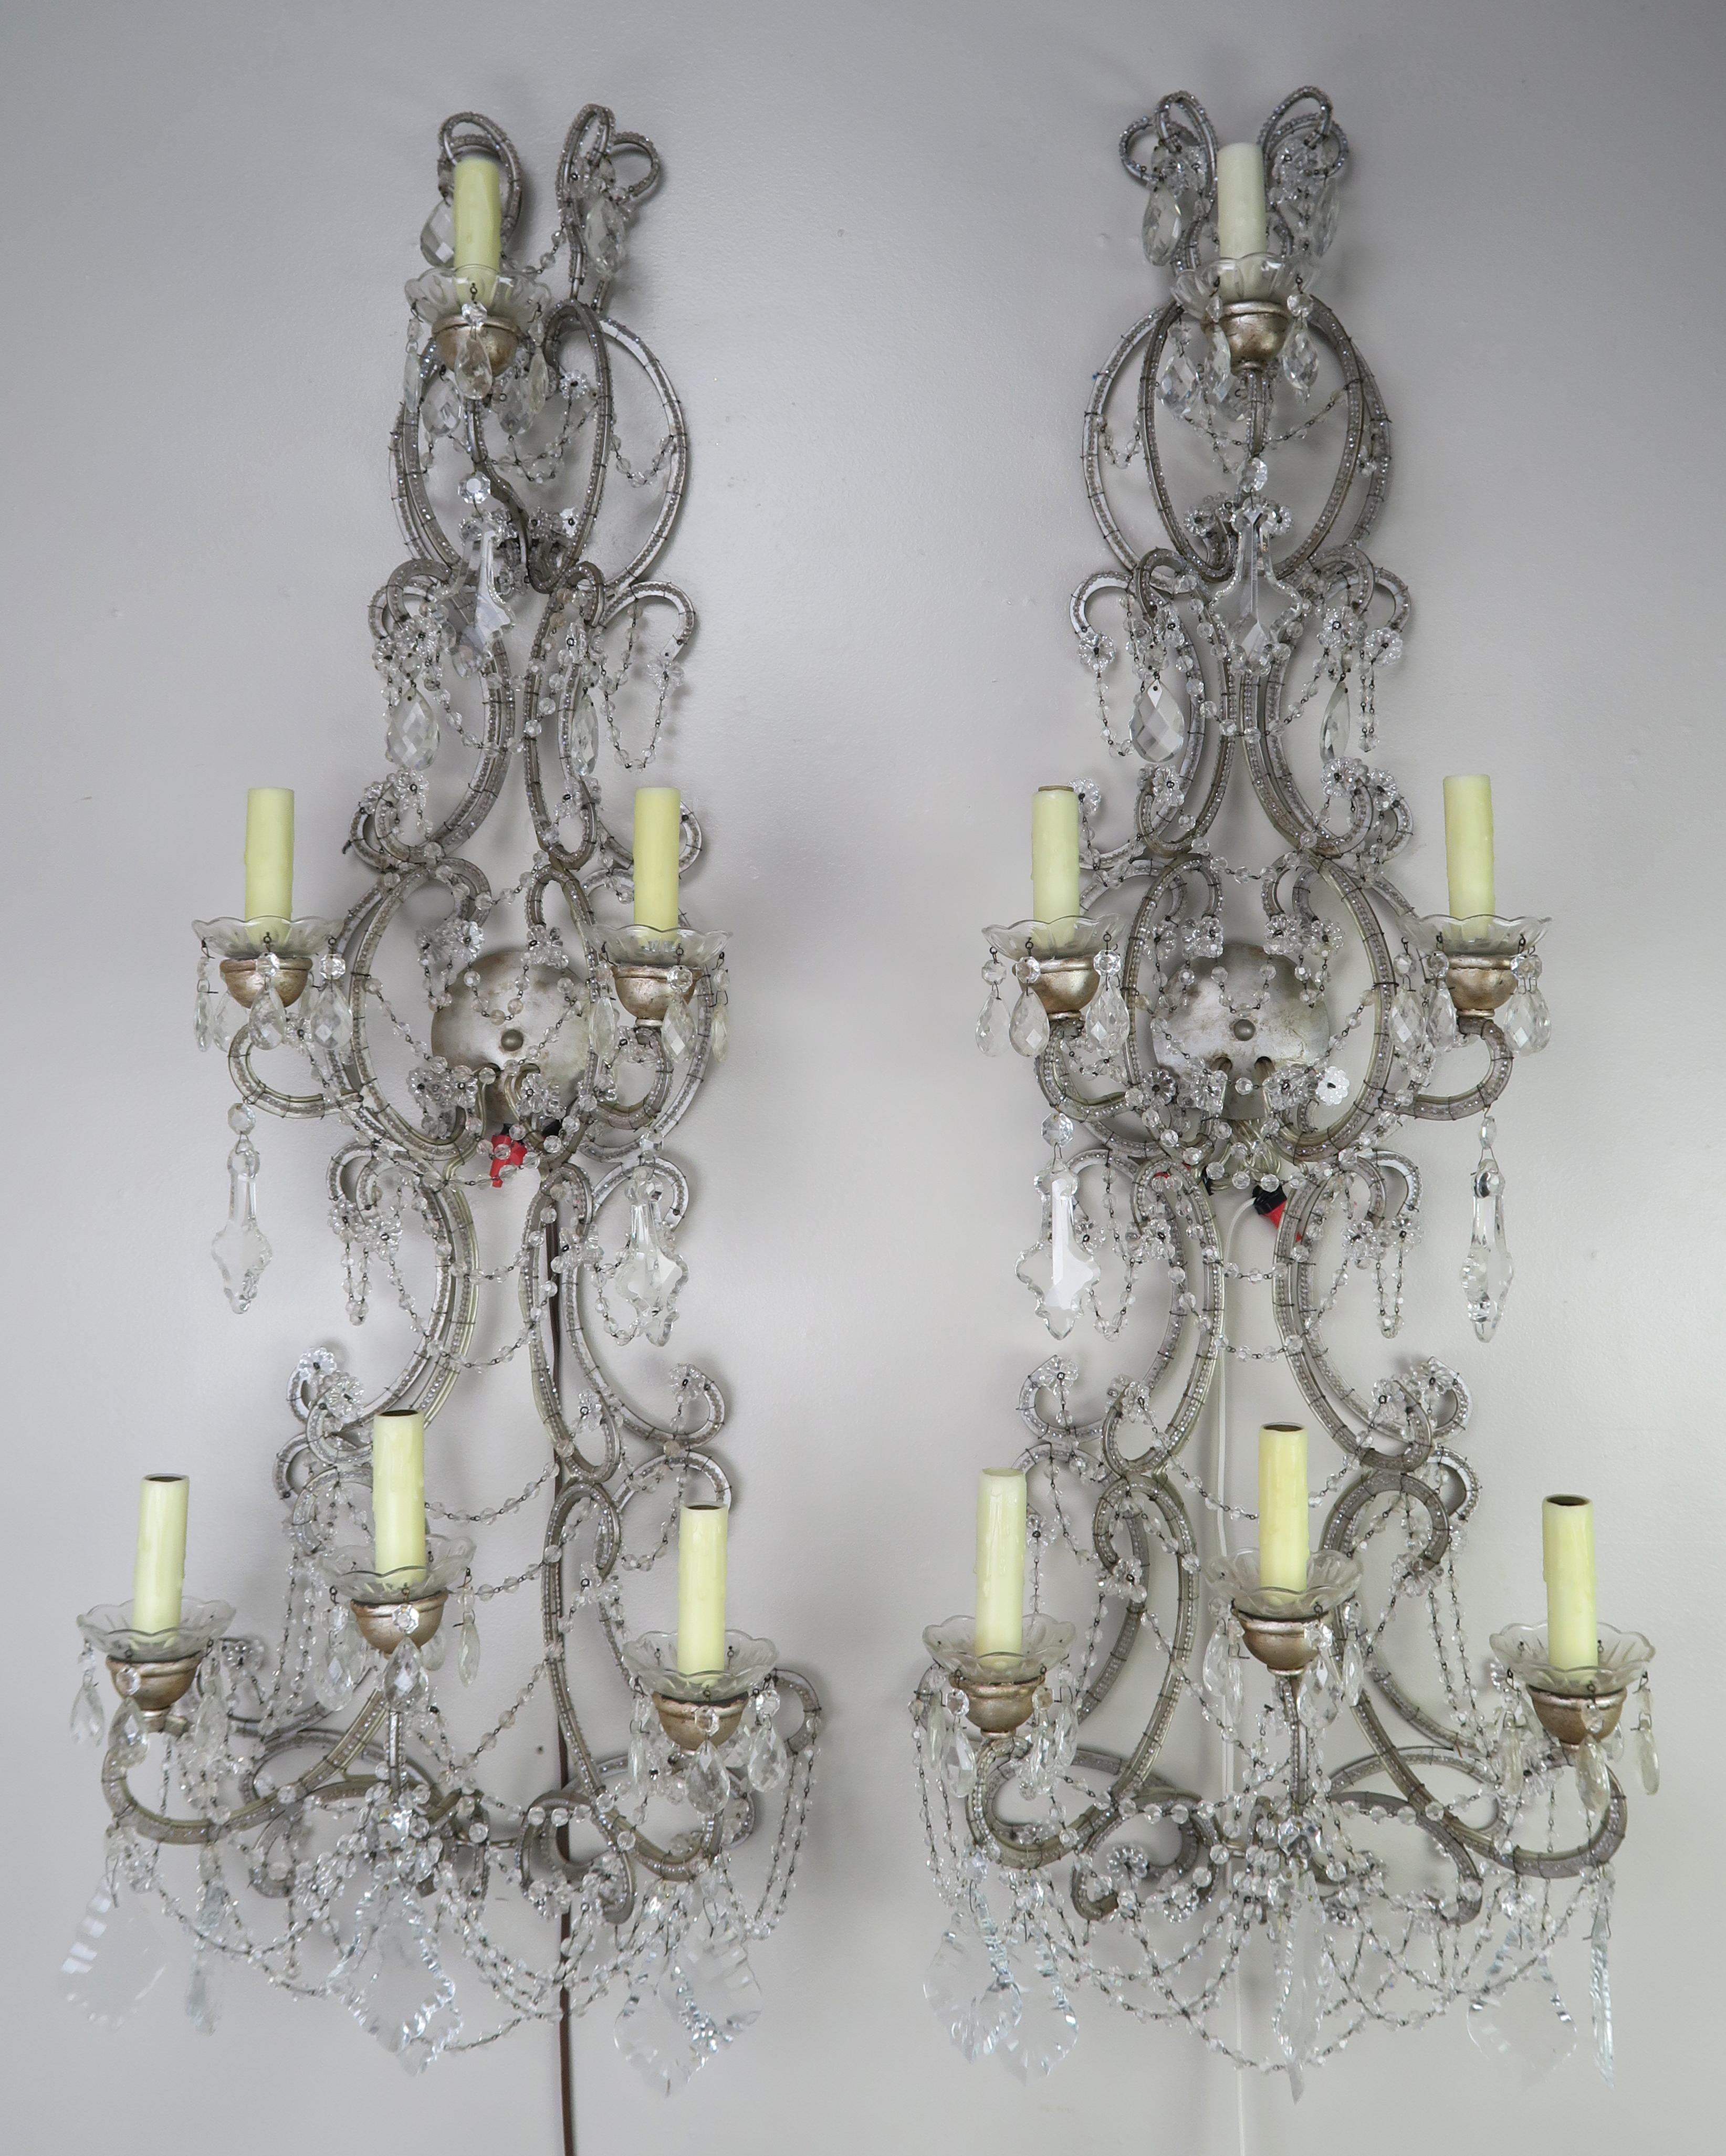 Pair of six-light Italian crystal beaded sconces in a silvered finish. Tiny beads decorate the frame of these sconces. Pendulum and almond shaped crystals are seen throughout along with garlands of English cut beads. The sconces are rewired with